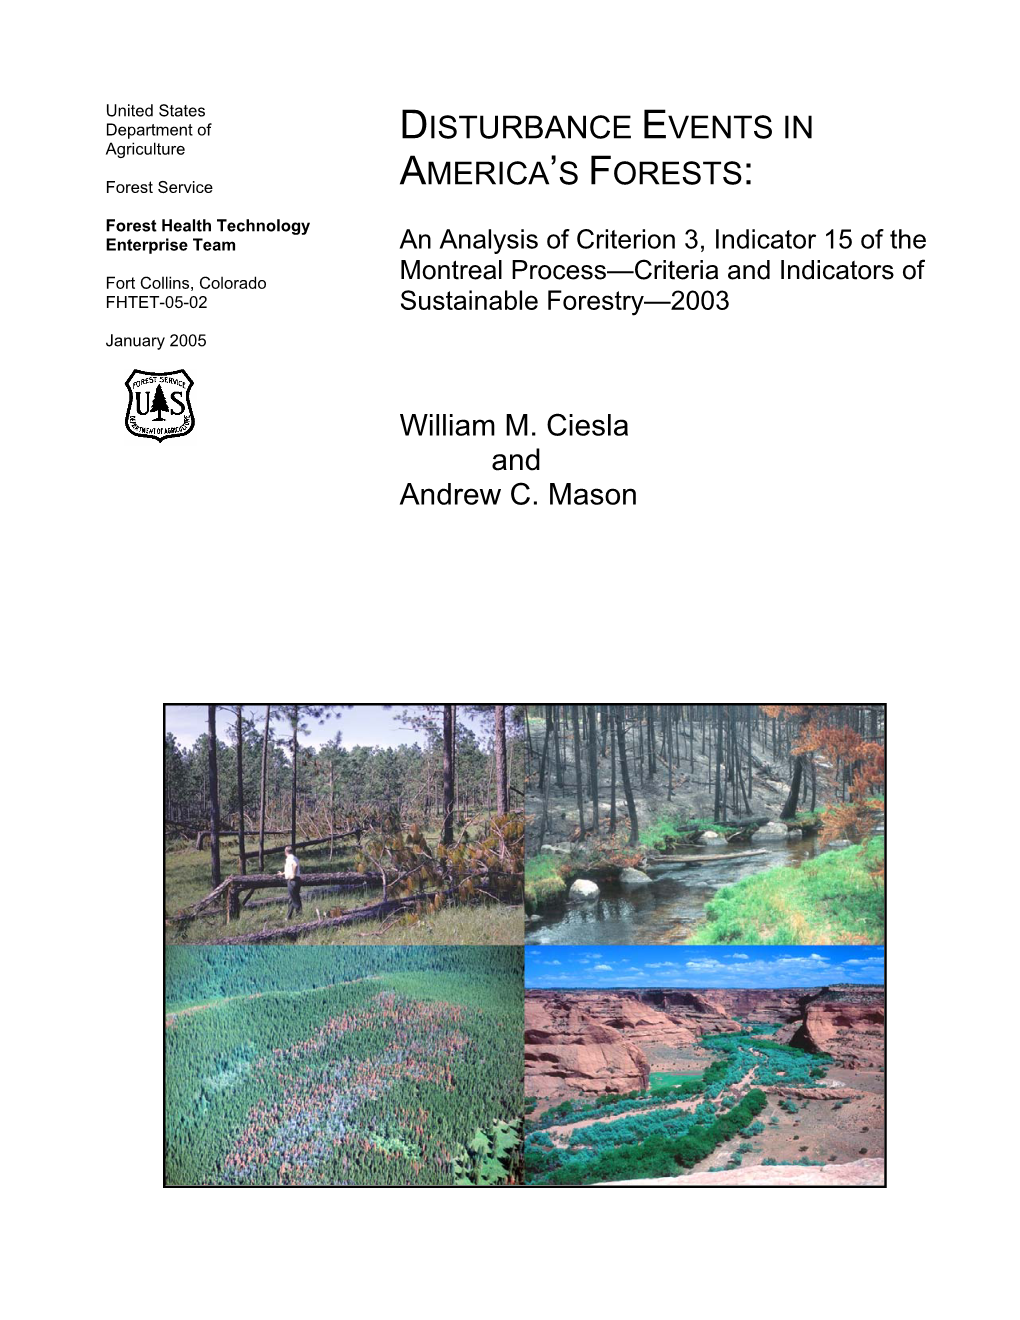 Processes and Agents Affecting the Forests of the United States – an Overview